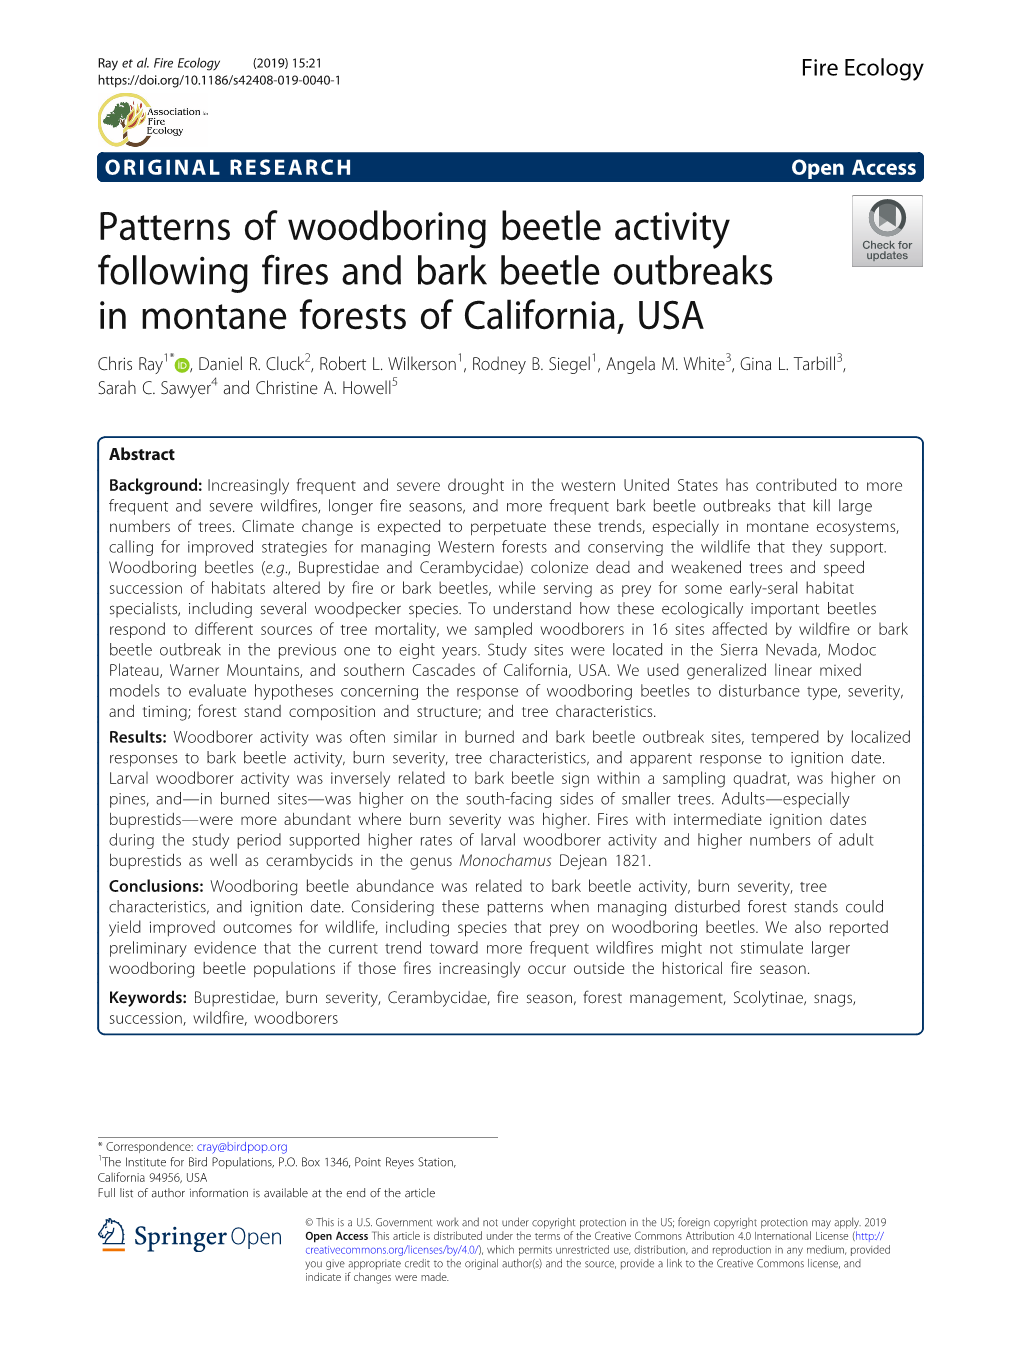 Patterns of Woodboring Beetle Activity Following Fires and Bark Beetle Outbreaks in Montane Forests of California, USA Chris Ray1* , Daniel R